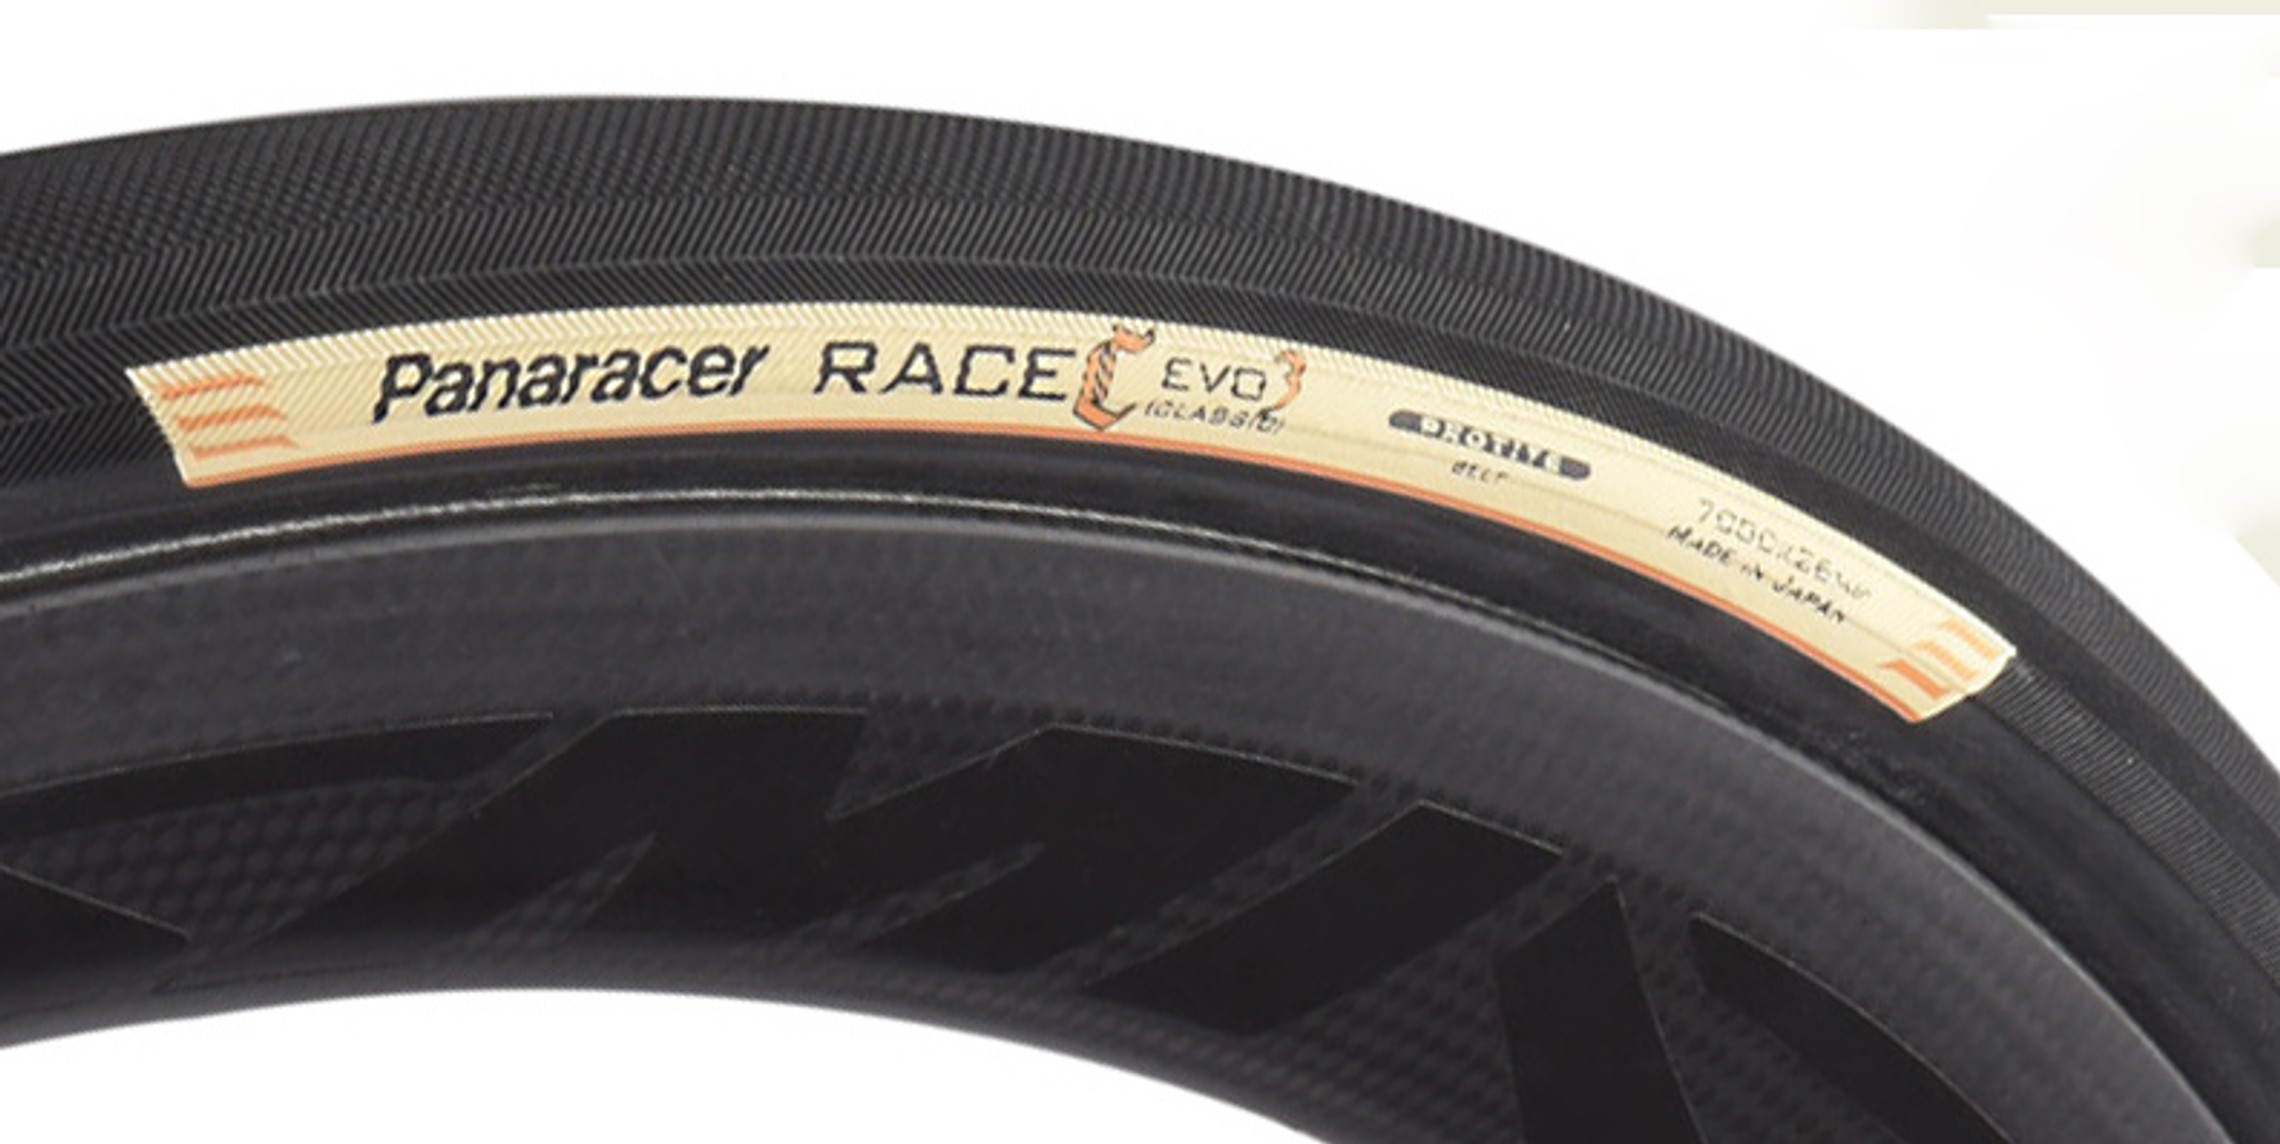 Details about   Panaracer Practice Tubular Tyre 700x25C 130PS Road Cycling Tire Full Black 